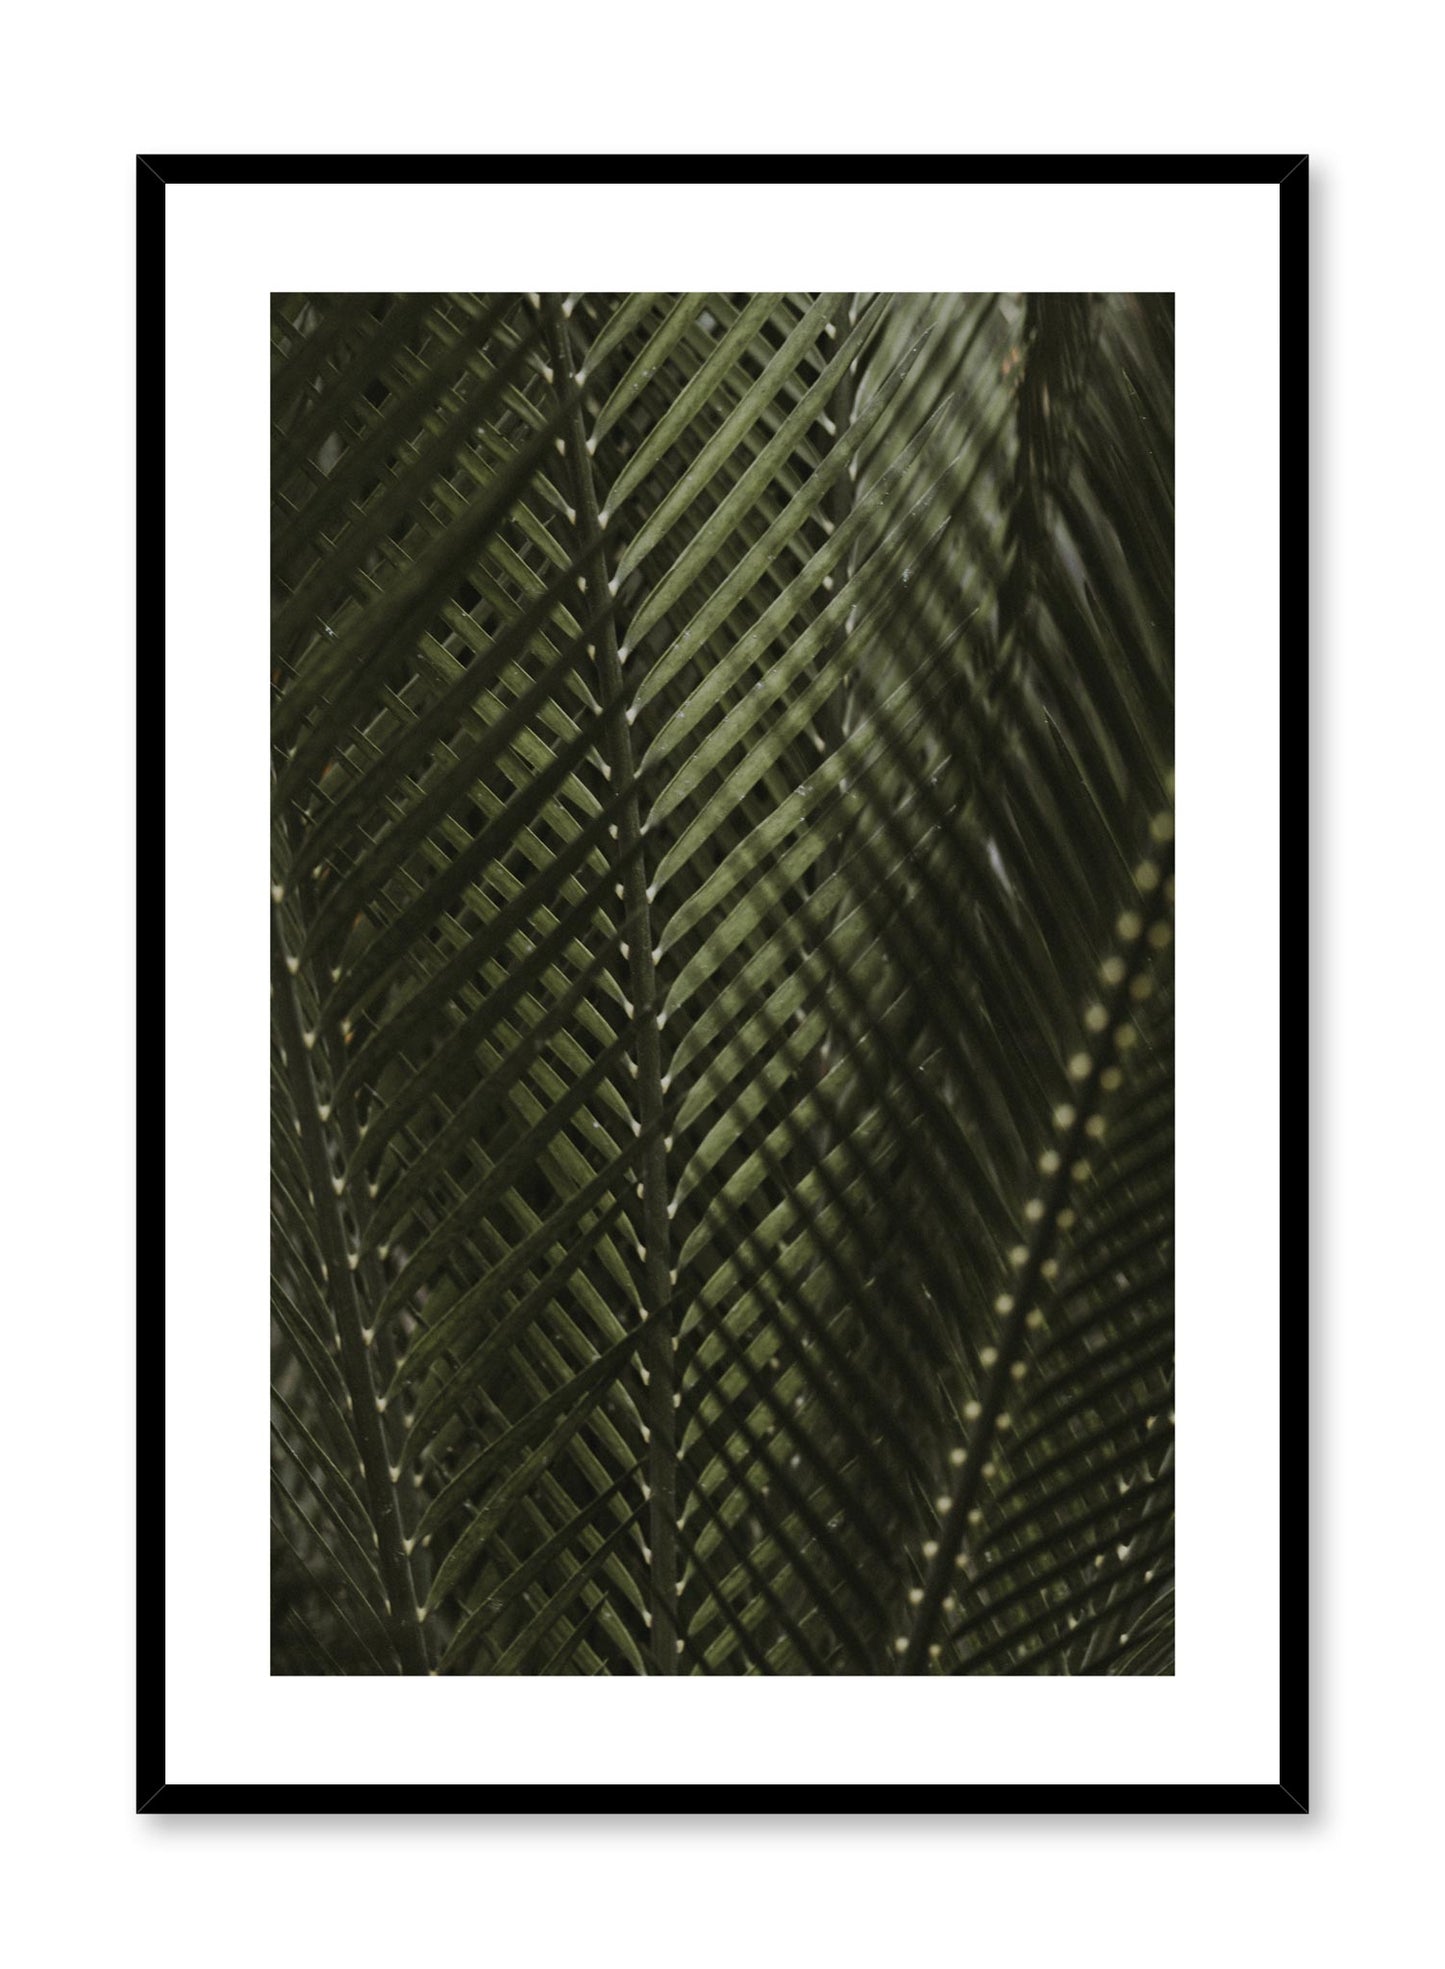 Minimalist design poster by Opposite Wall with Shadowy Ferns botanical photography